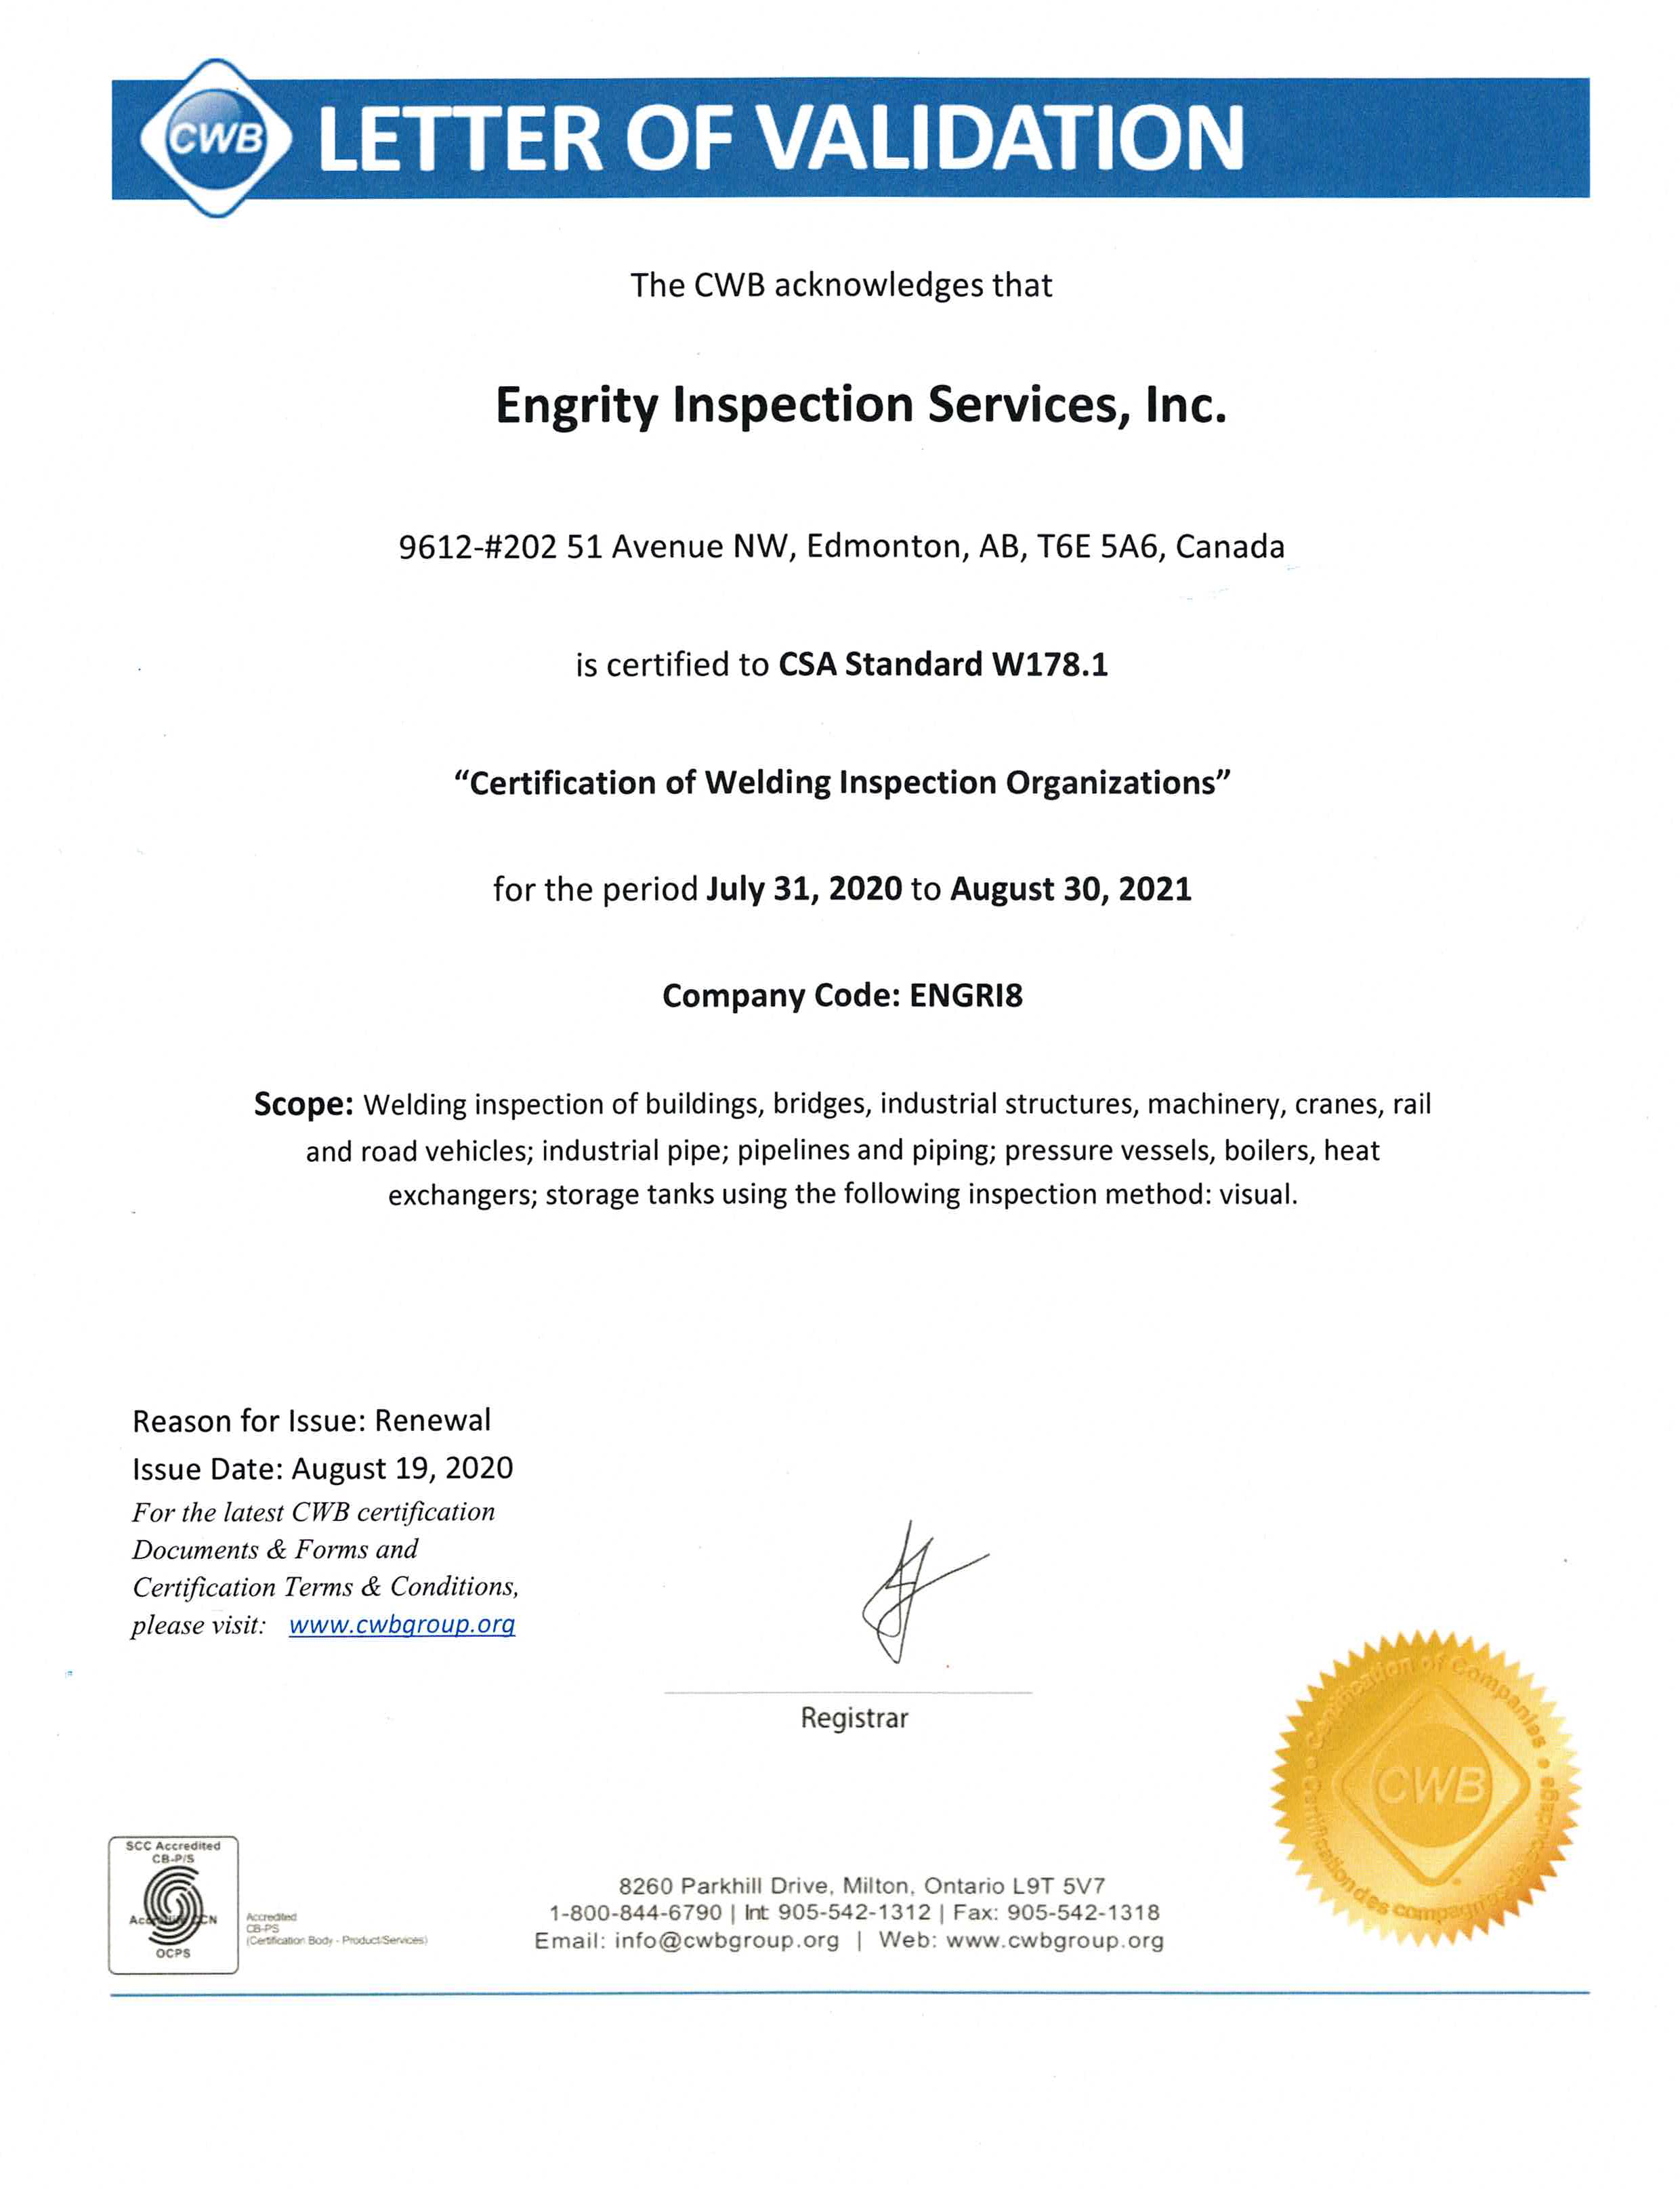 CWB Certificate Engrity Inspection Services Inc